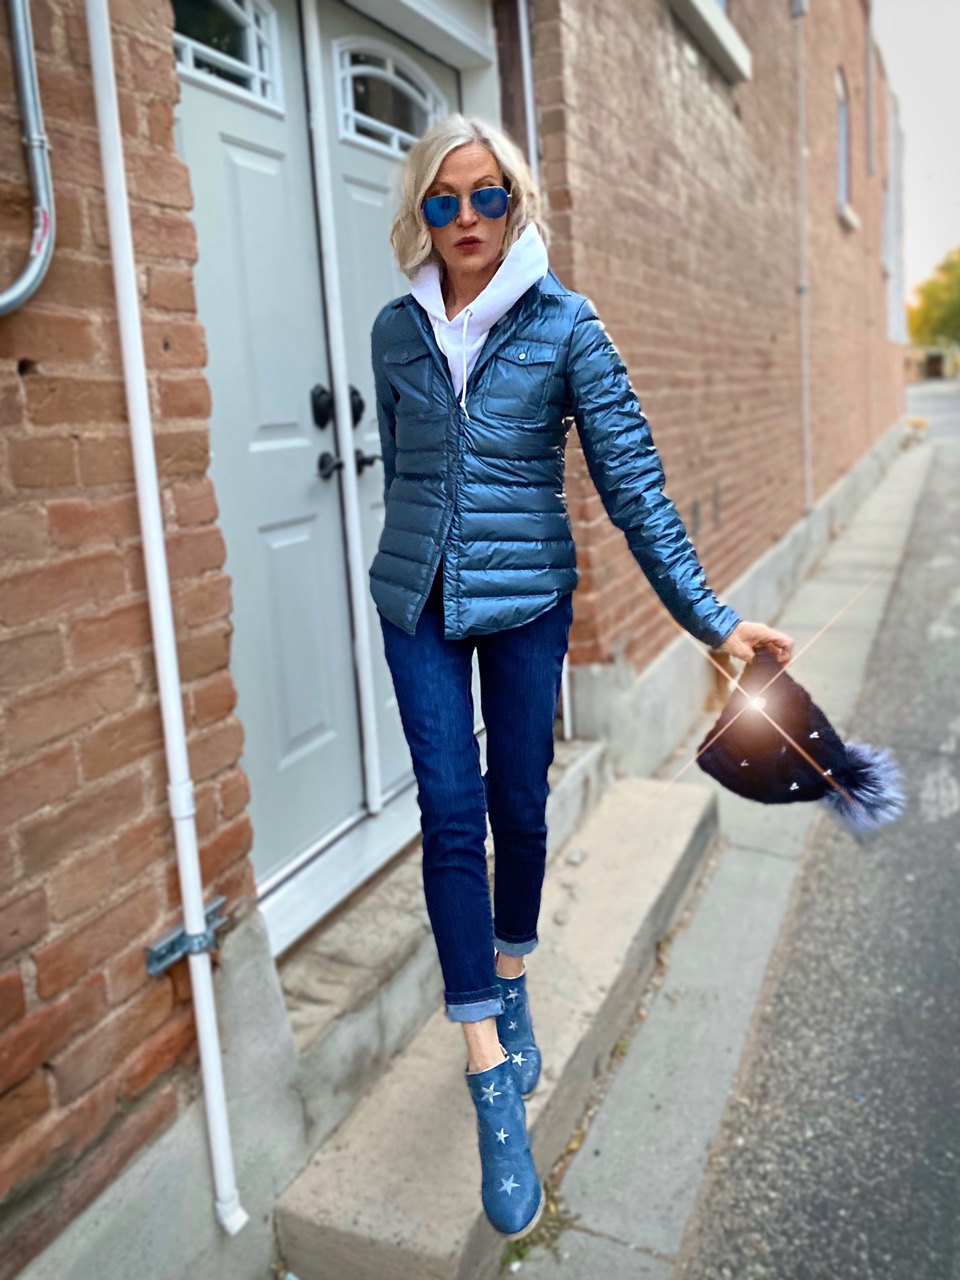 Lifestyle Influencer, Jamie Lewinger of More Than Turquoise wearing the Harrow Royale down shirt from Cotes of London in metallic blue 